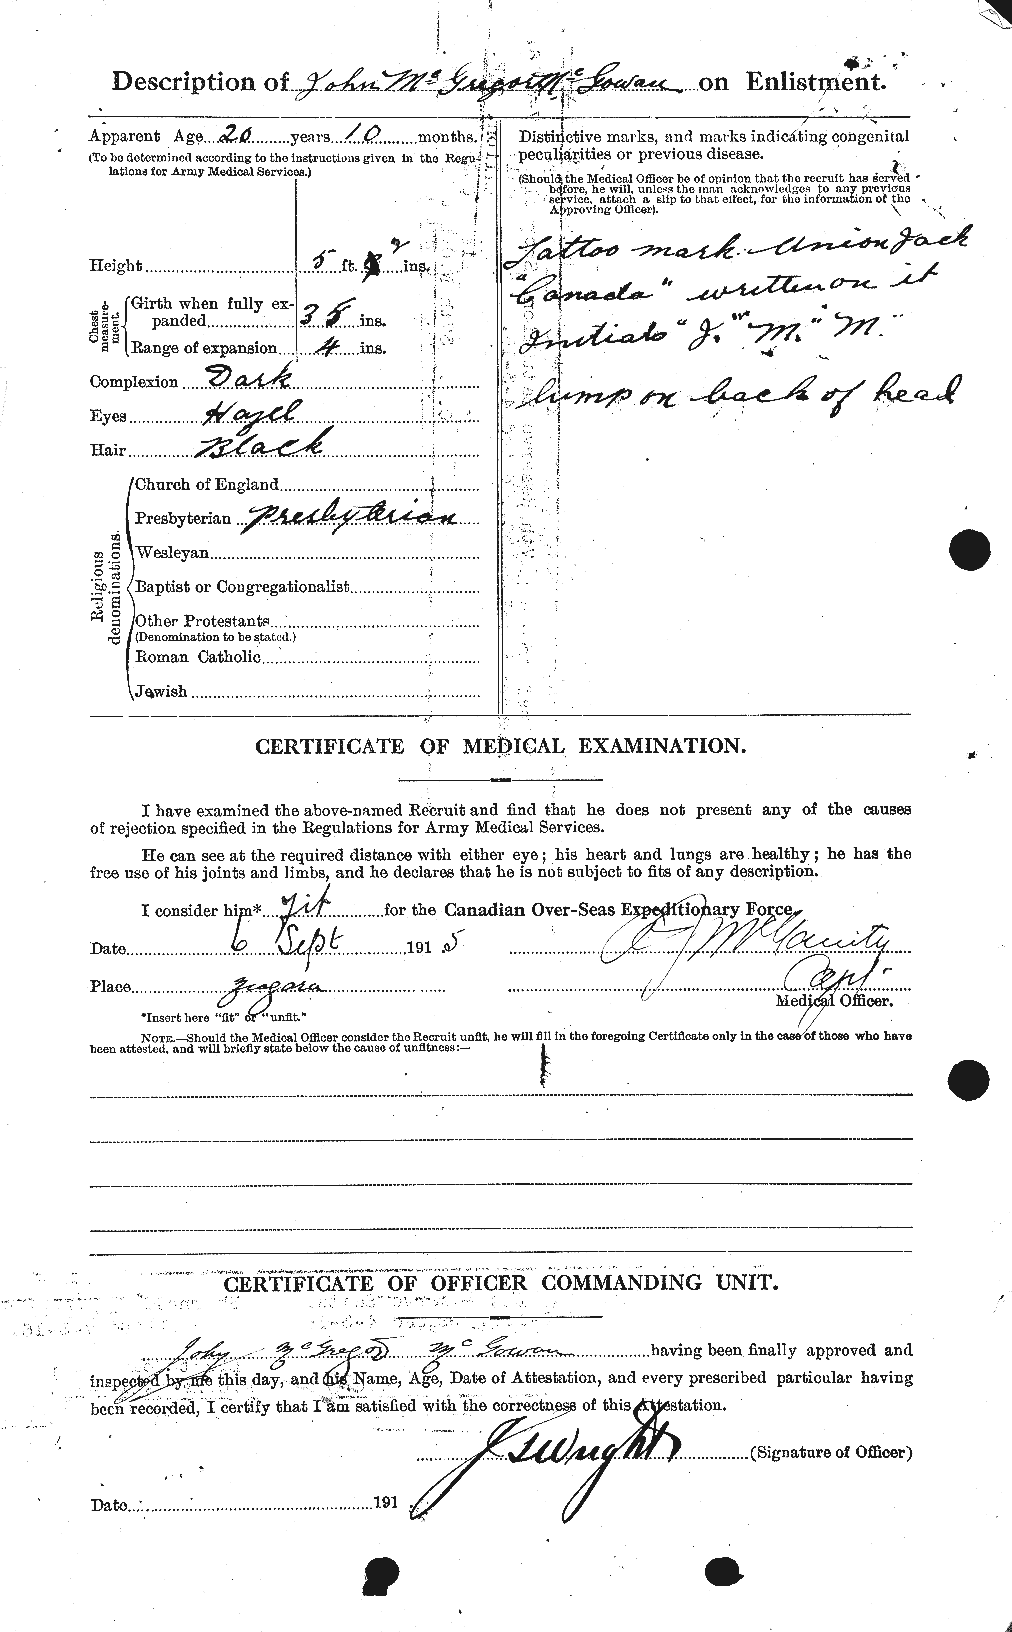 Personnel Records of the First World War - CEF 523177b